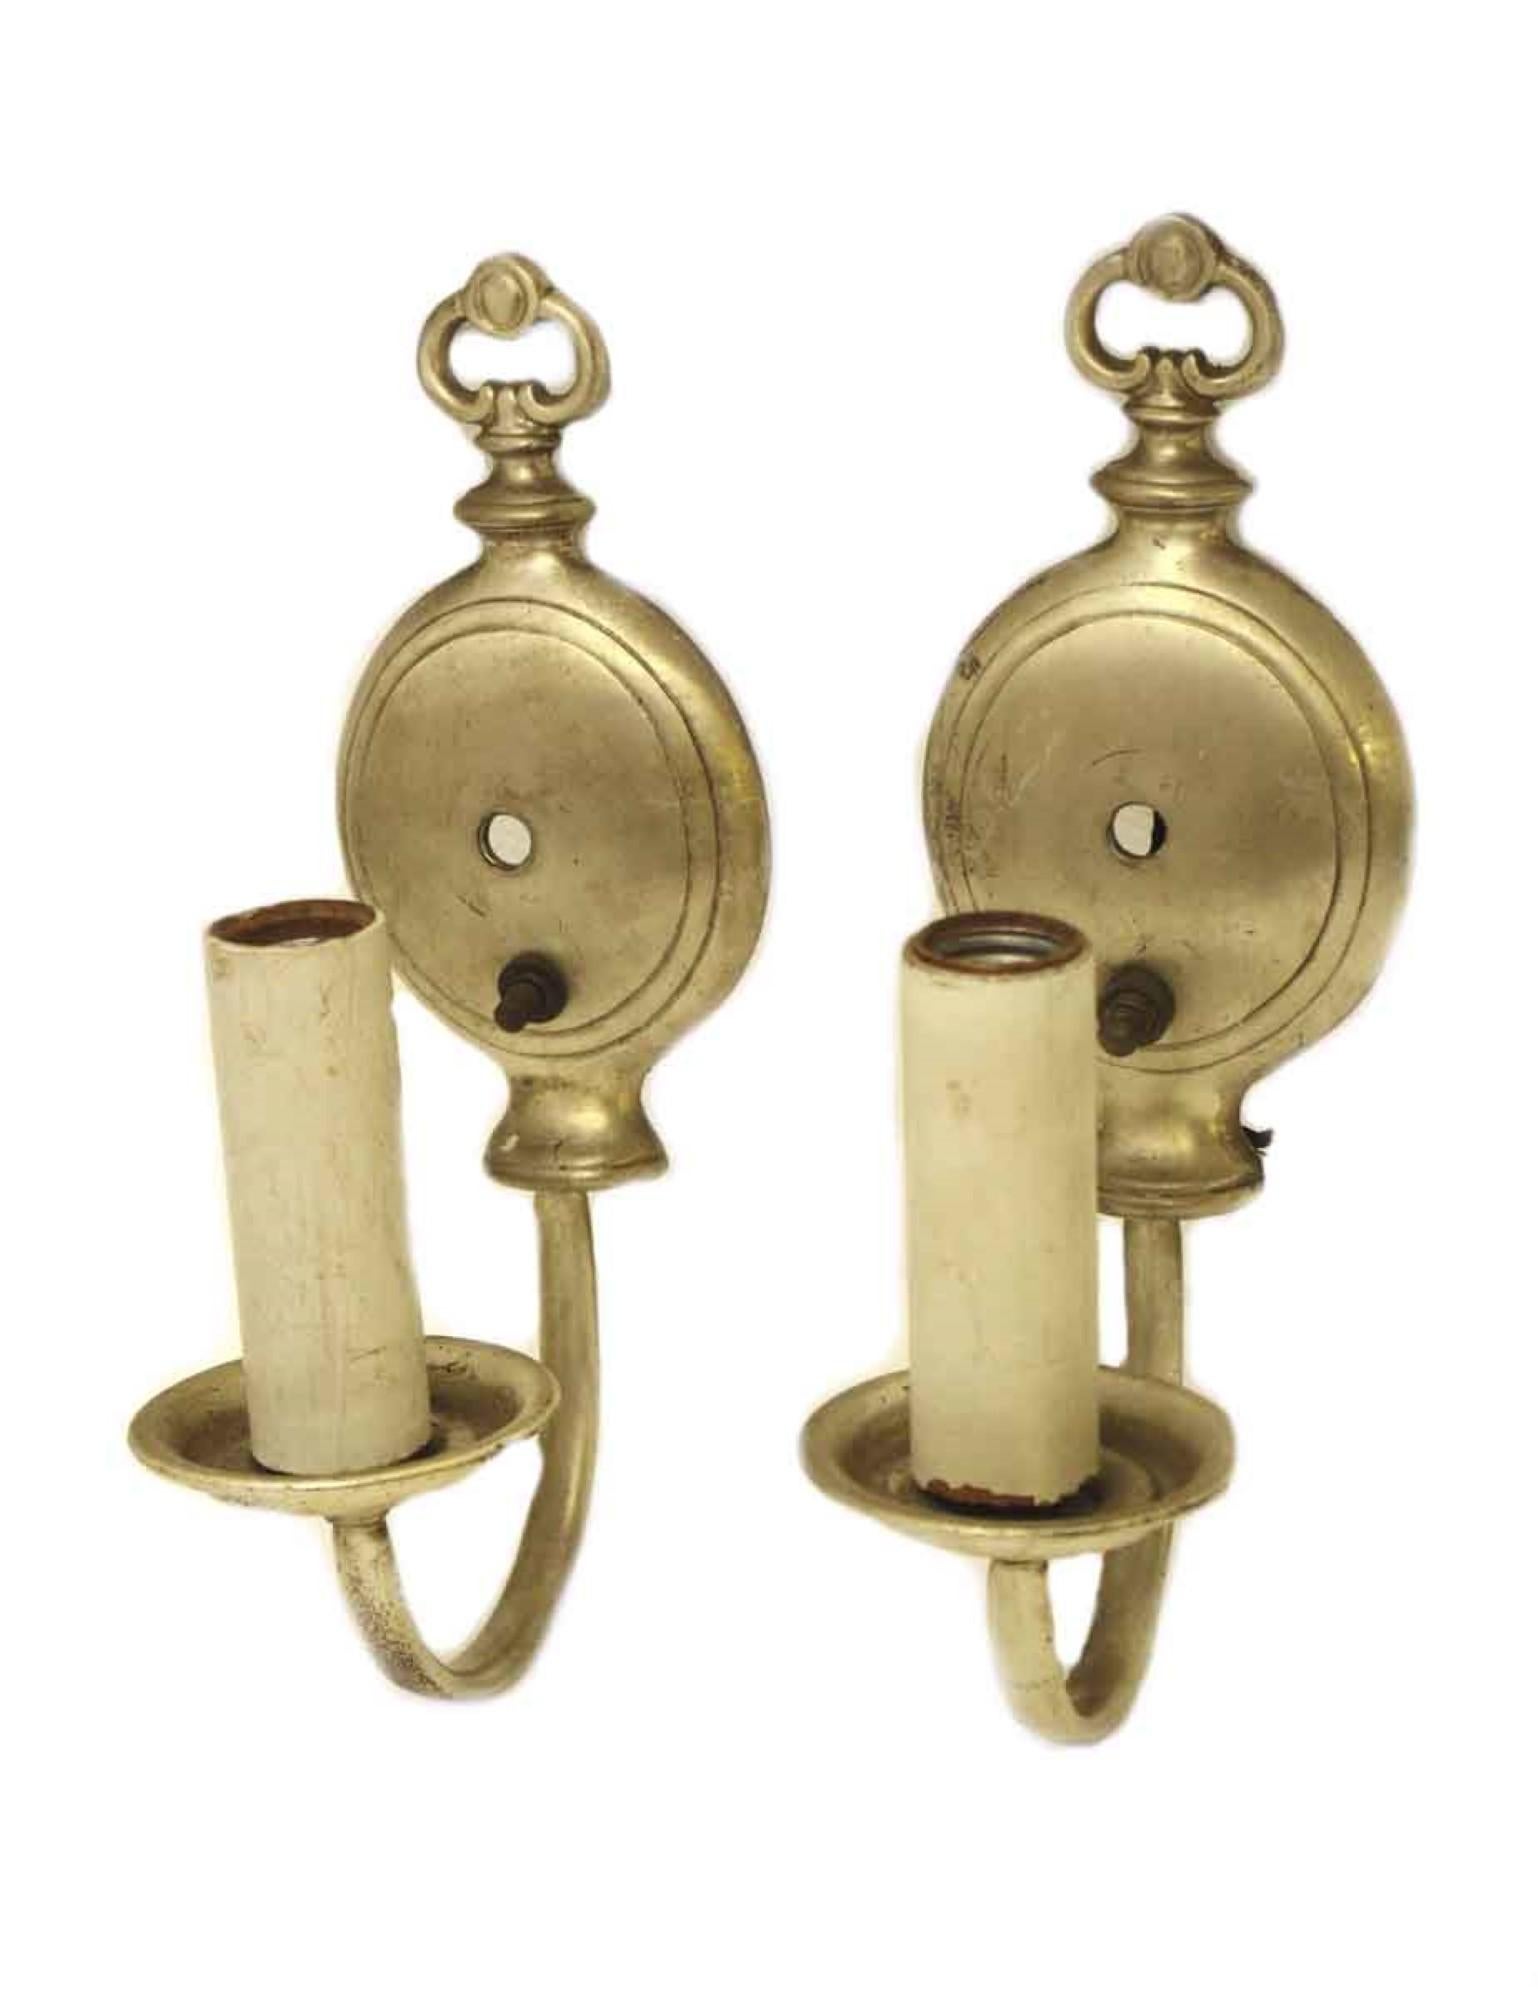 1920s silver plated solid brass pair of one-arm wall sconces. Priced as a pair. This can be seen at our 400 Gilligan St location in Scranton, PA.